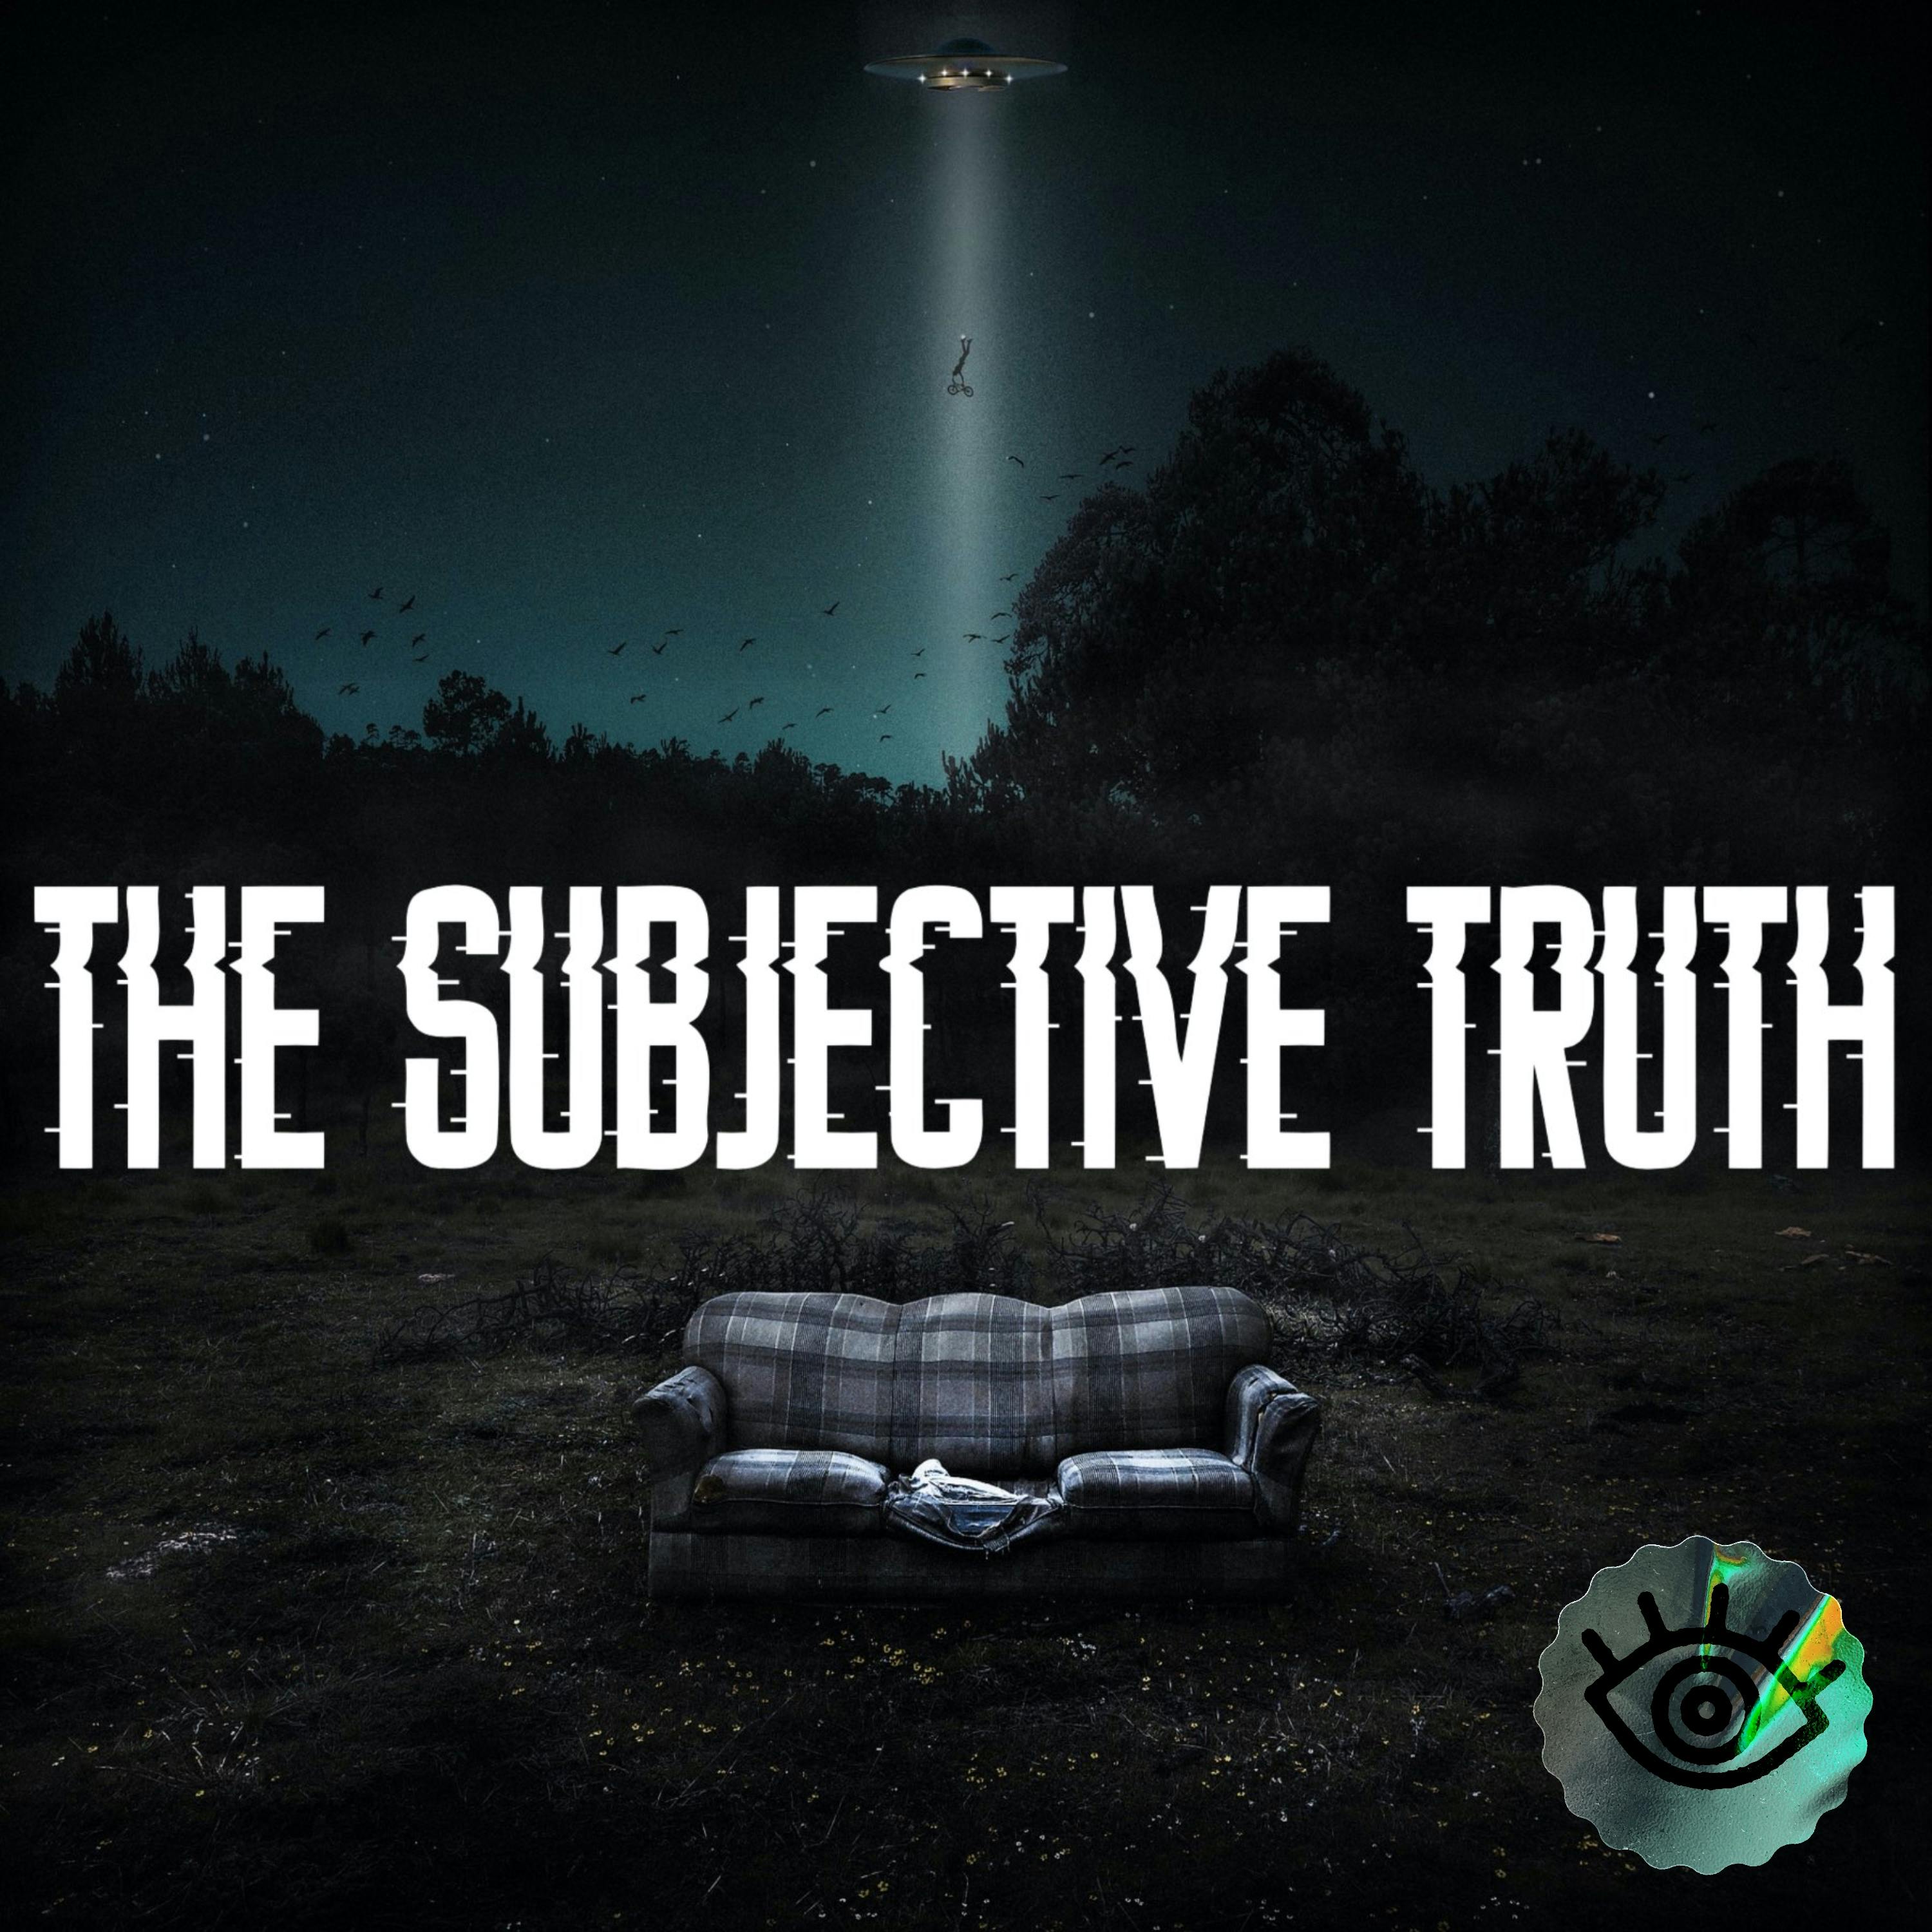 Introducing: The Subjective Truth